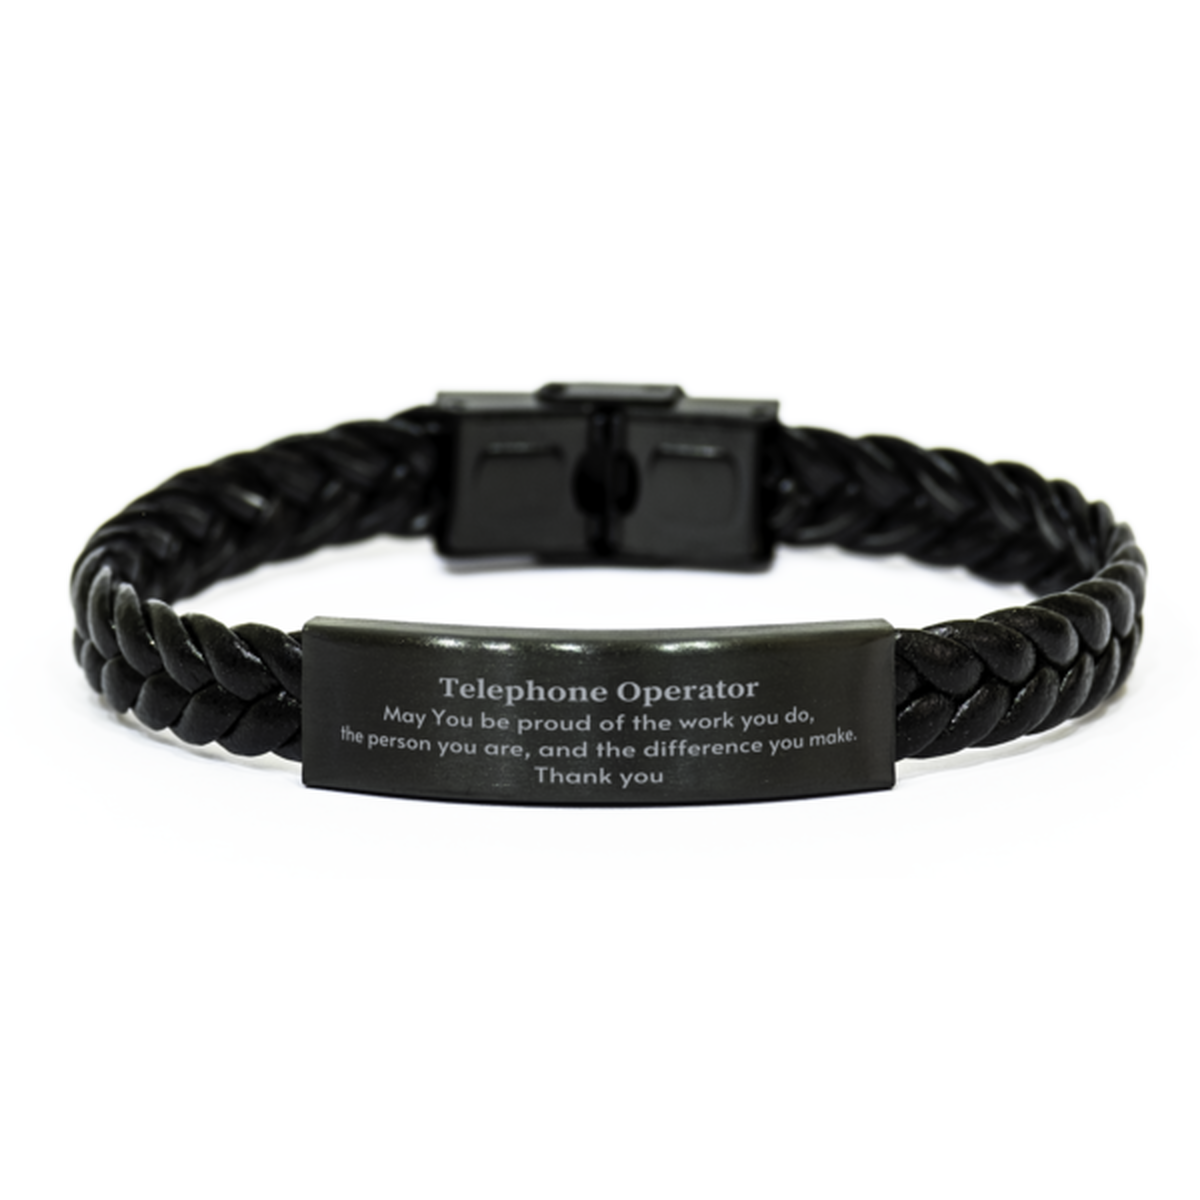 Heartwarming Braided Leather Bracelet Retirement Coworkers Gifts for Telephone Operator, Telephone Operator May You be proud of the work you do, the person you are Gifts for Boss Men Women Friends